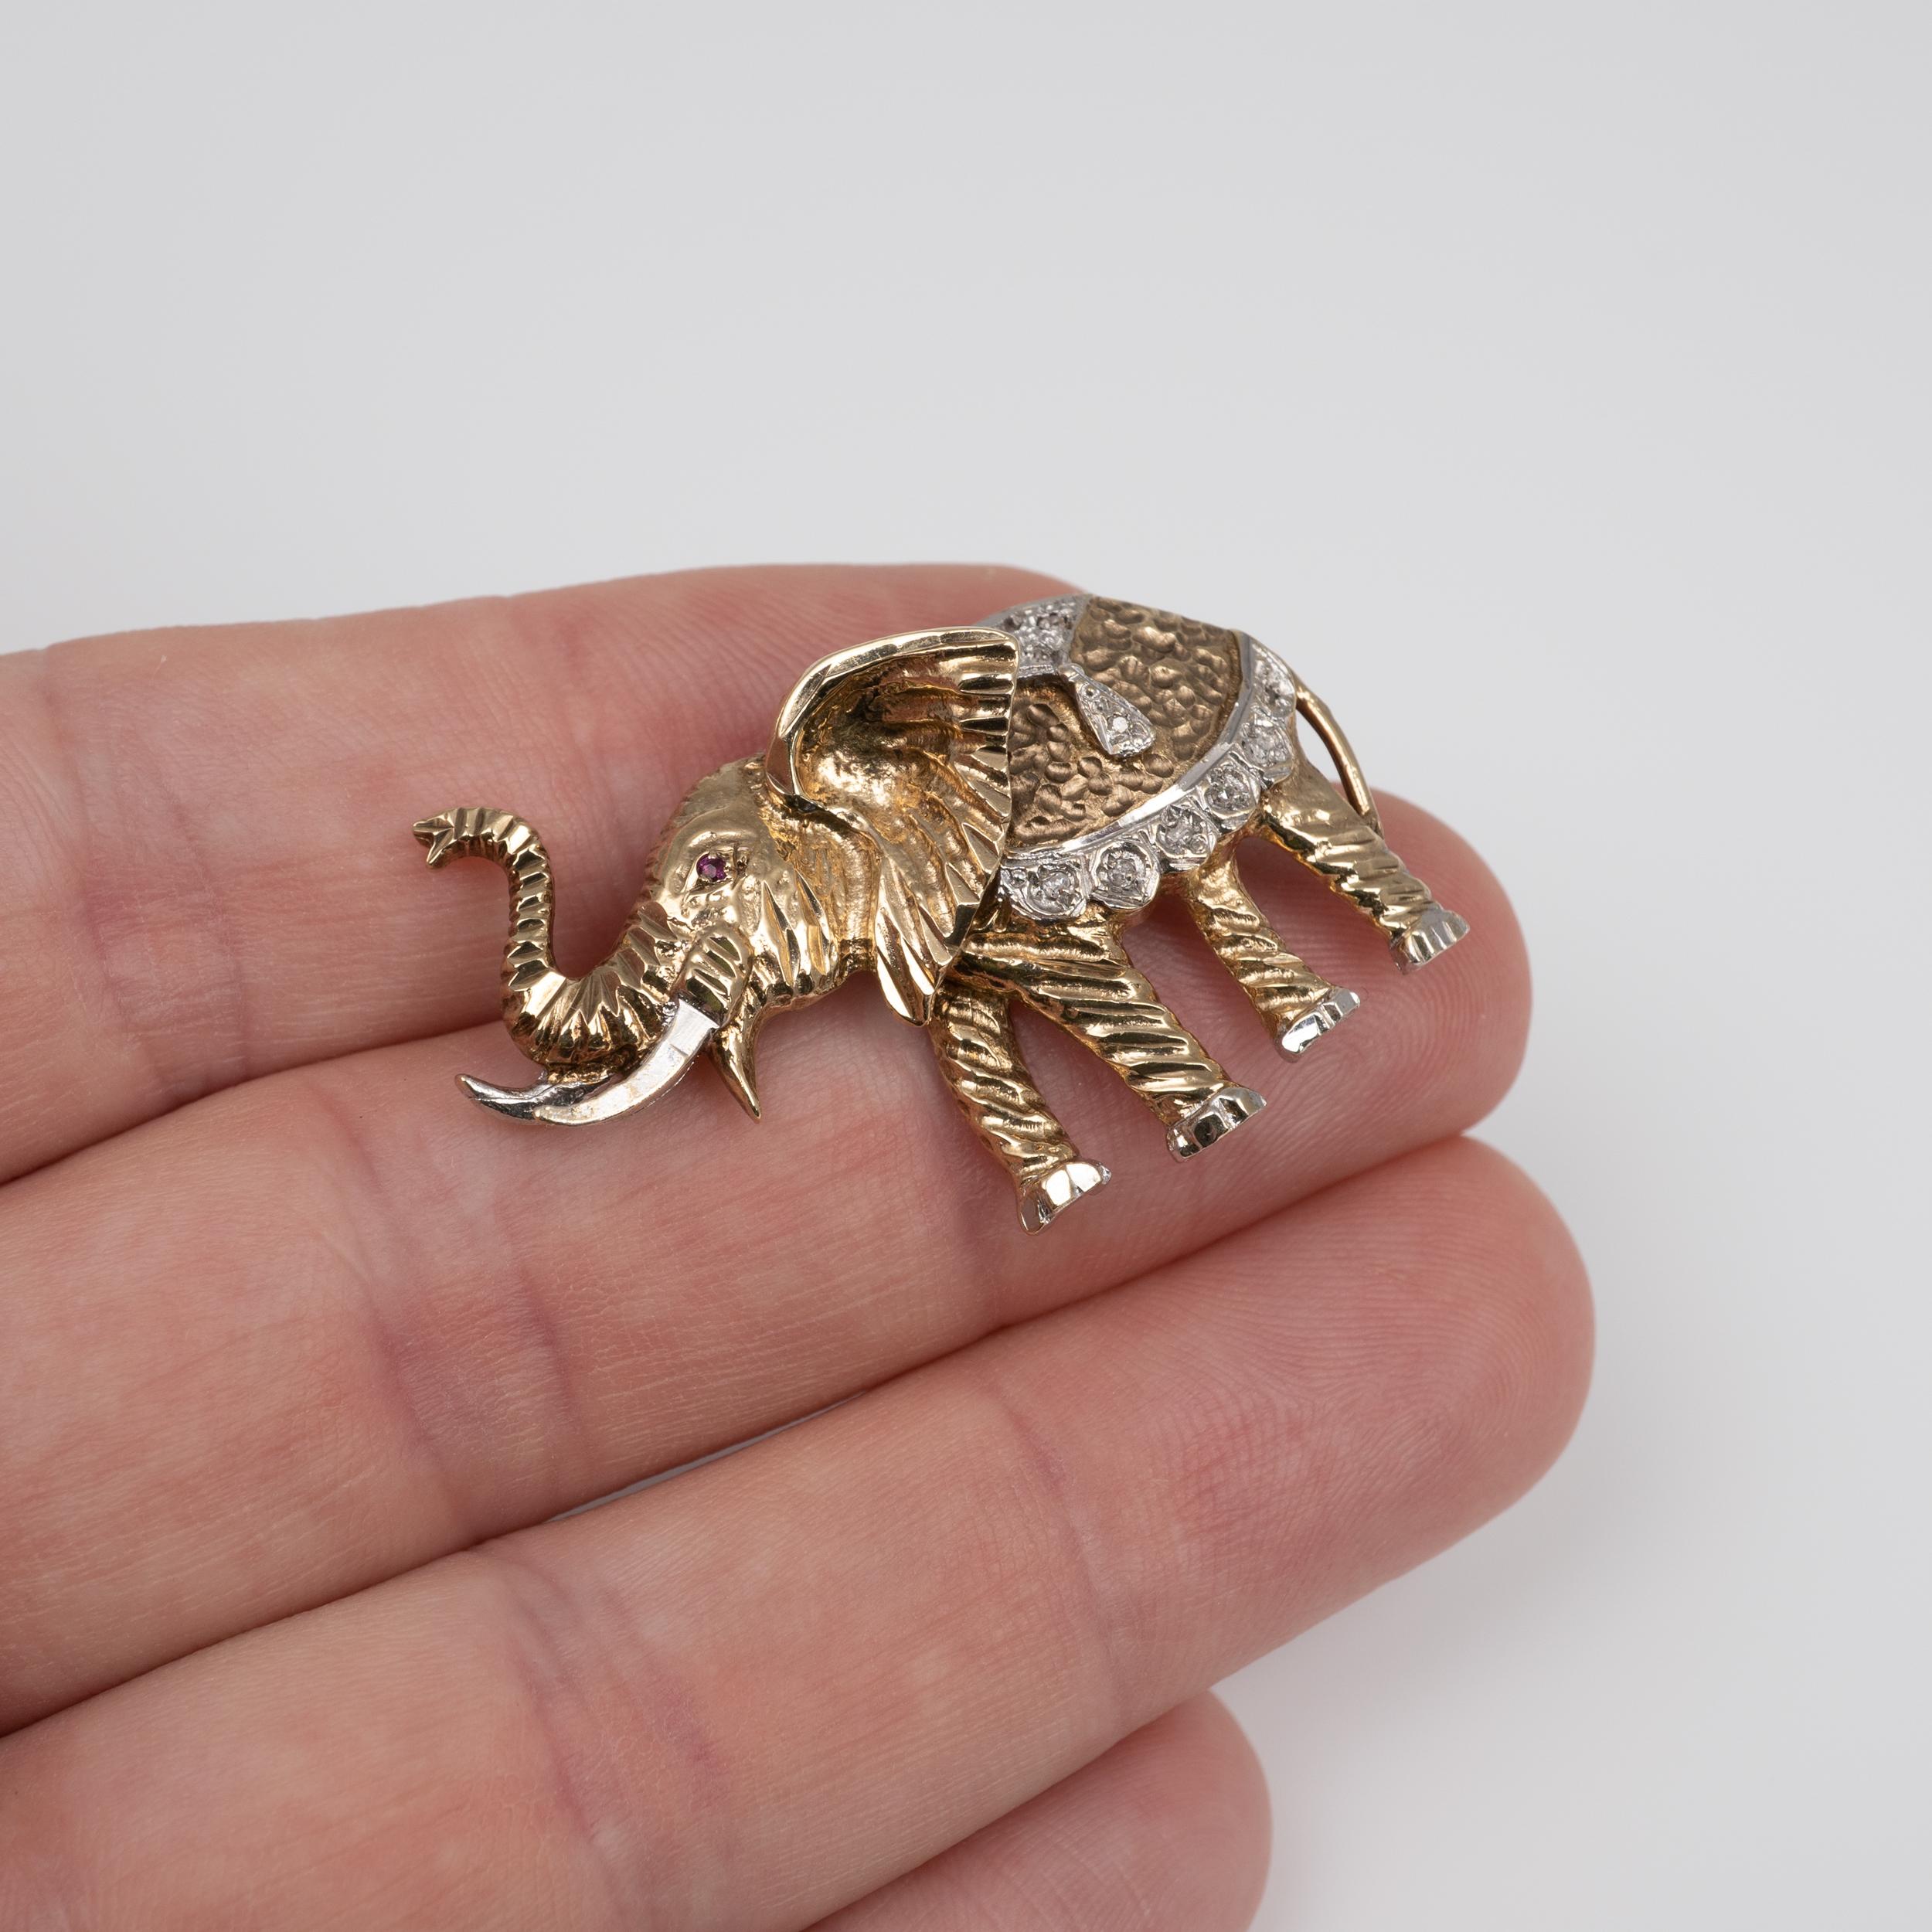 A fabulous vintage diamond and ruby yellow and white gold elephant brooch.

The two-tone gold elephant with trunk up is nicely crafted with a stylish textured pattern. It is set with diamonds and a single ruby to the eye.

The item is fully